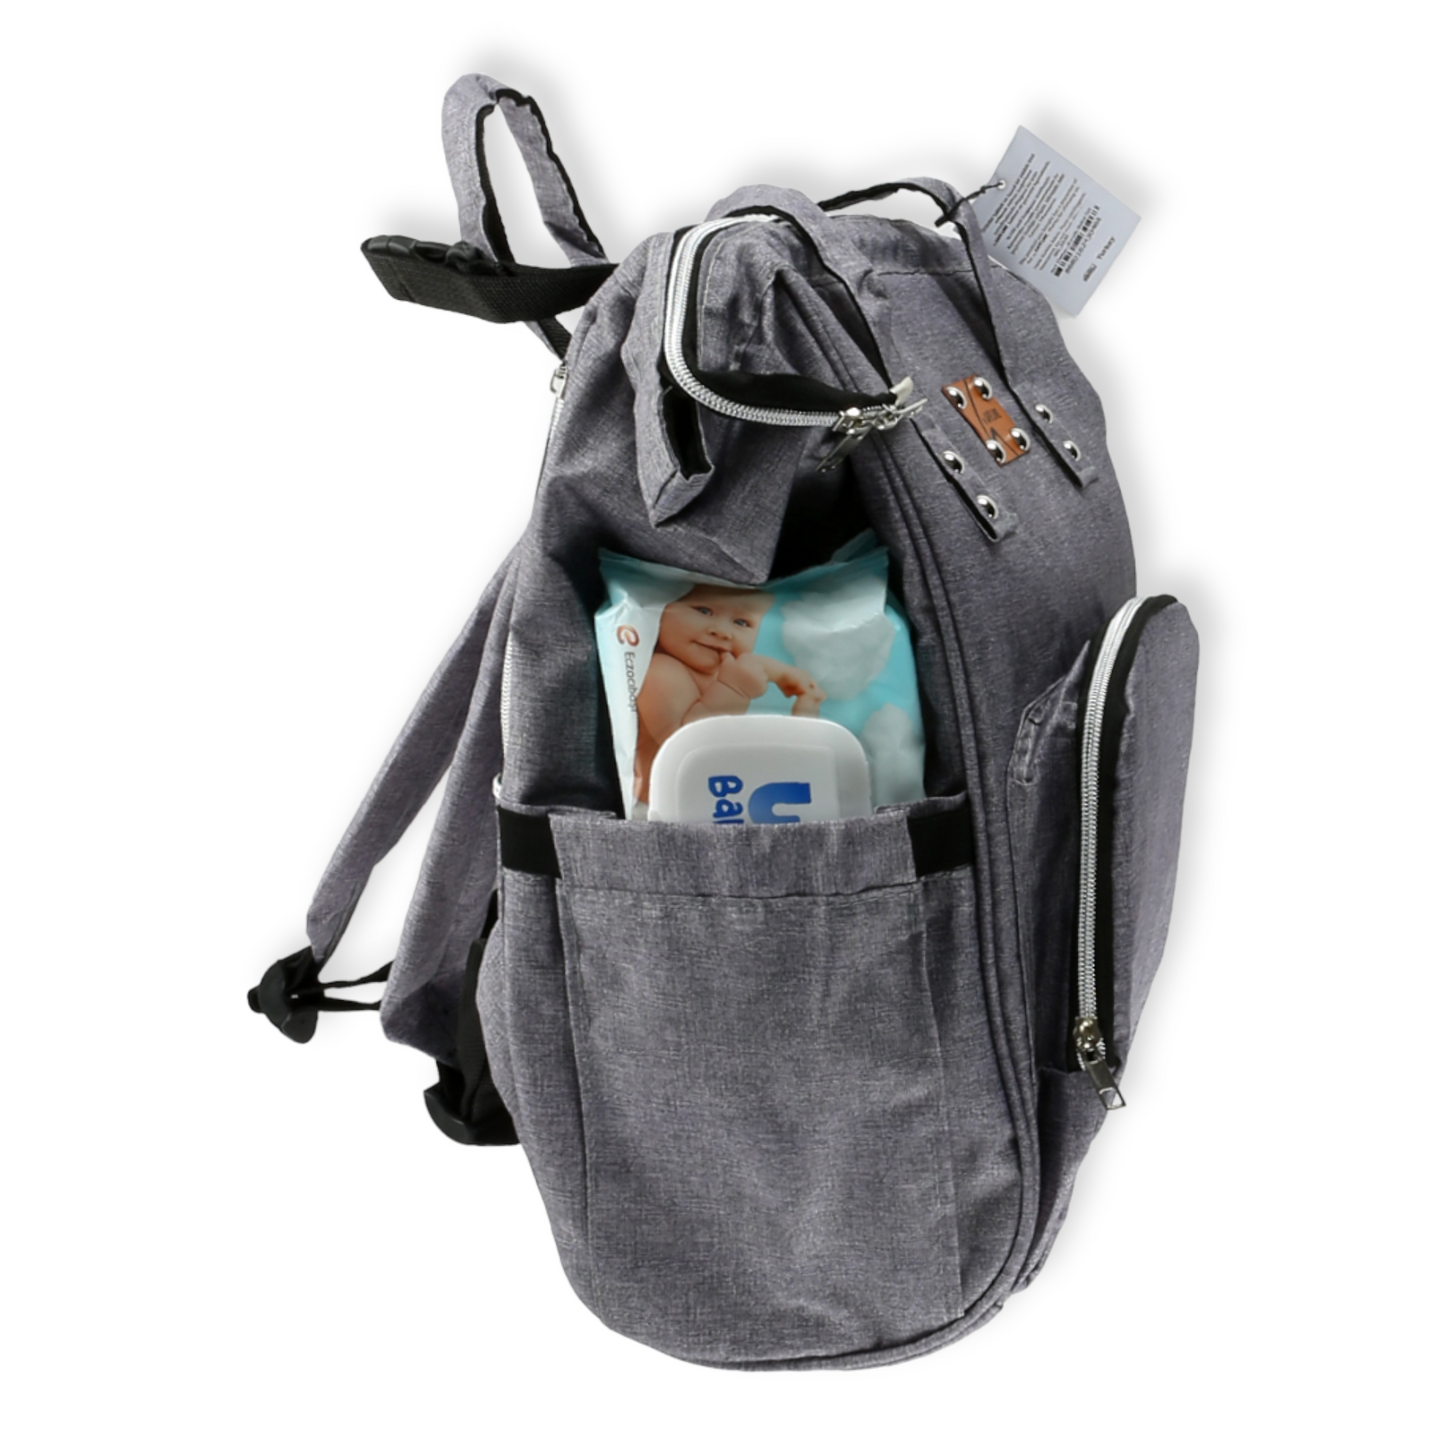 Light Grey Mommy Bag-Bag, Bags, catbabygear, catbag, Changing, Diapers, Grey, Maternity, Nappy, Nursery, Travel-Safe Line-[Too Twee]-[Tootwee]-[baby]-[newborn]-[clothes]-[essentials]-[toys]-[Lebanon]